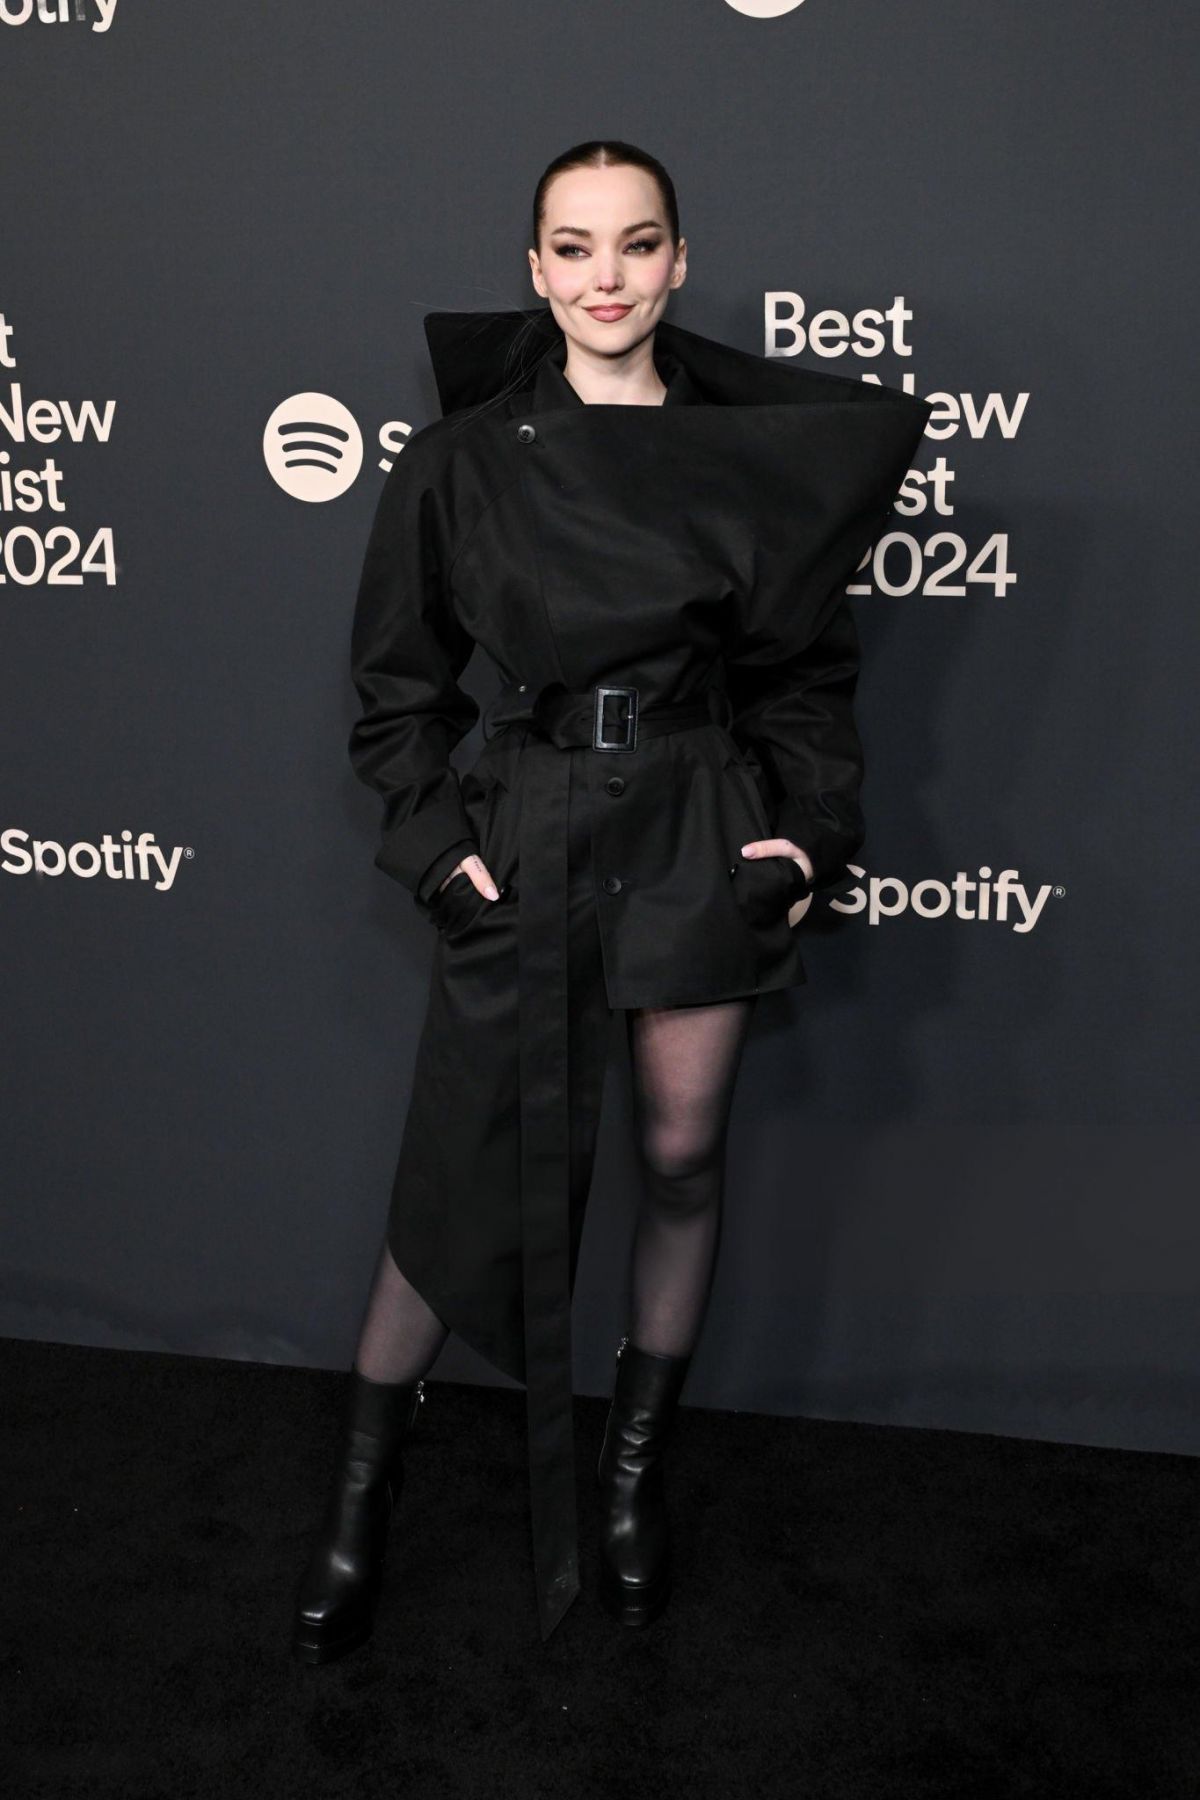 DOVE CAMERON at Spotify Best New Artist Party in Los Angeles 02/01/2024